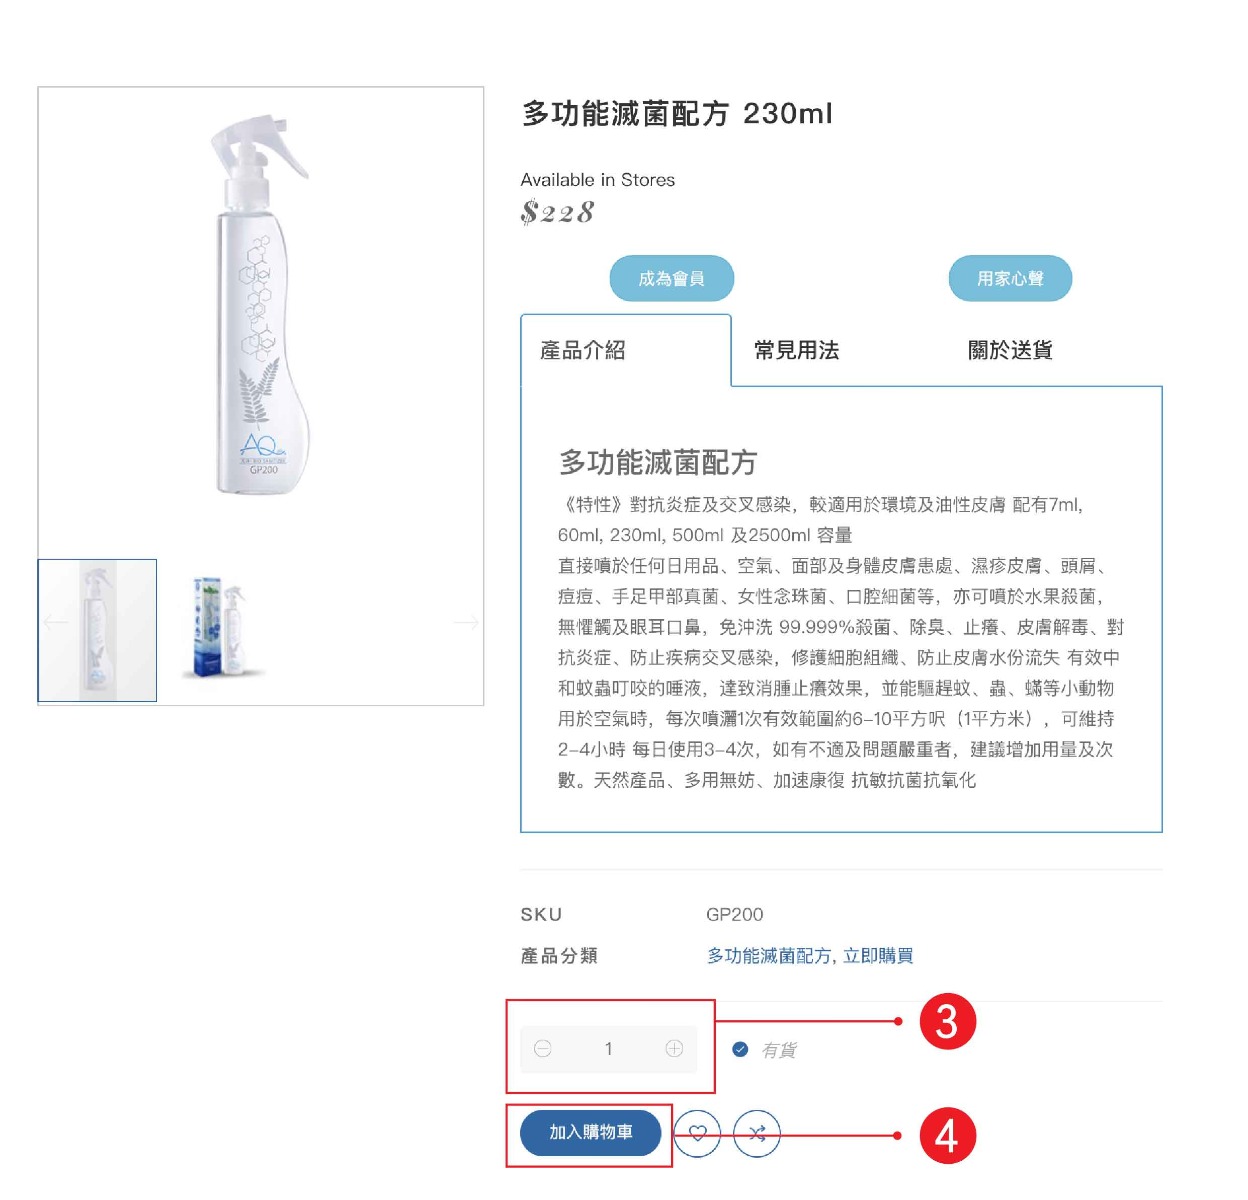 Shopping tutorial, AQ Bio disinfection and sterilization spray, sterilizes up to 99.9999%, fights eczema, acne, skin sensitivity, candida, nasal allergies, sore throat, helps skin repair cells, and produces antibacterial properties